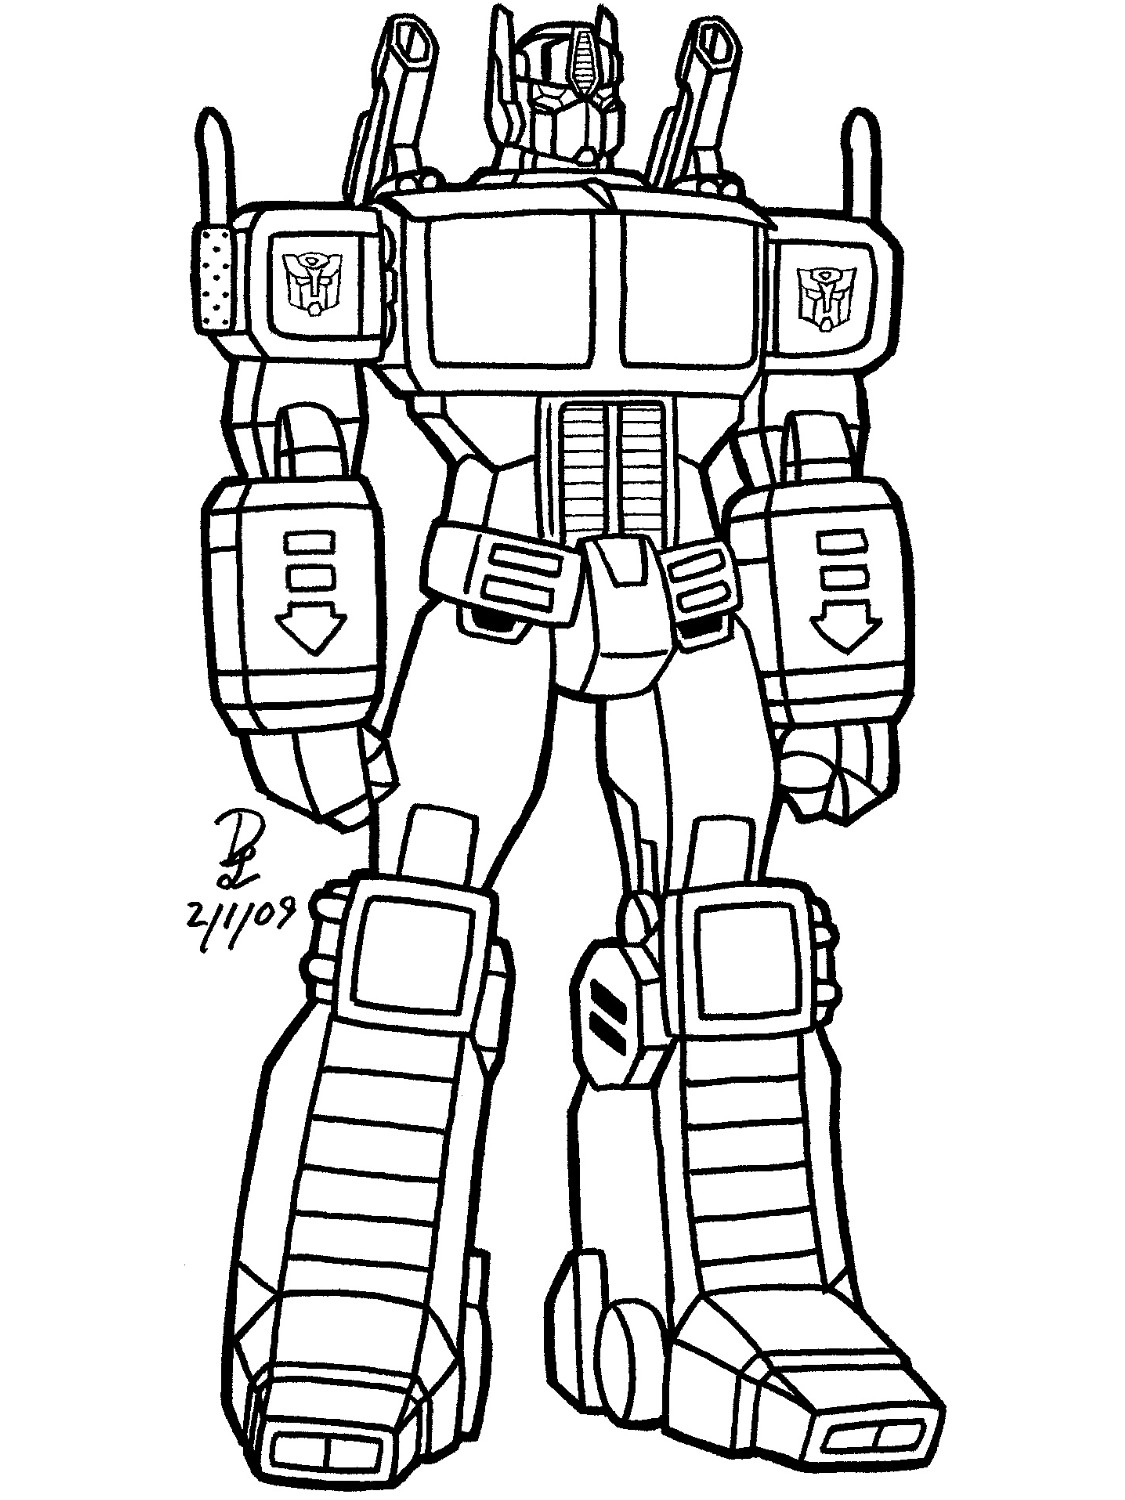 Transformers (Superheroes) – Printable coloring pages